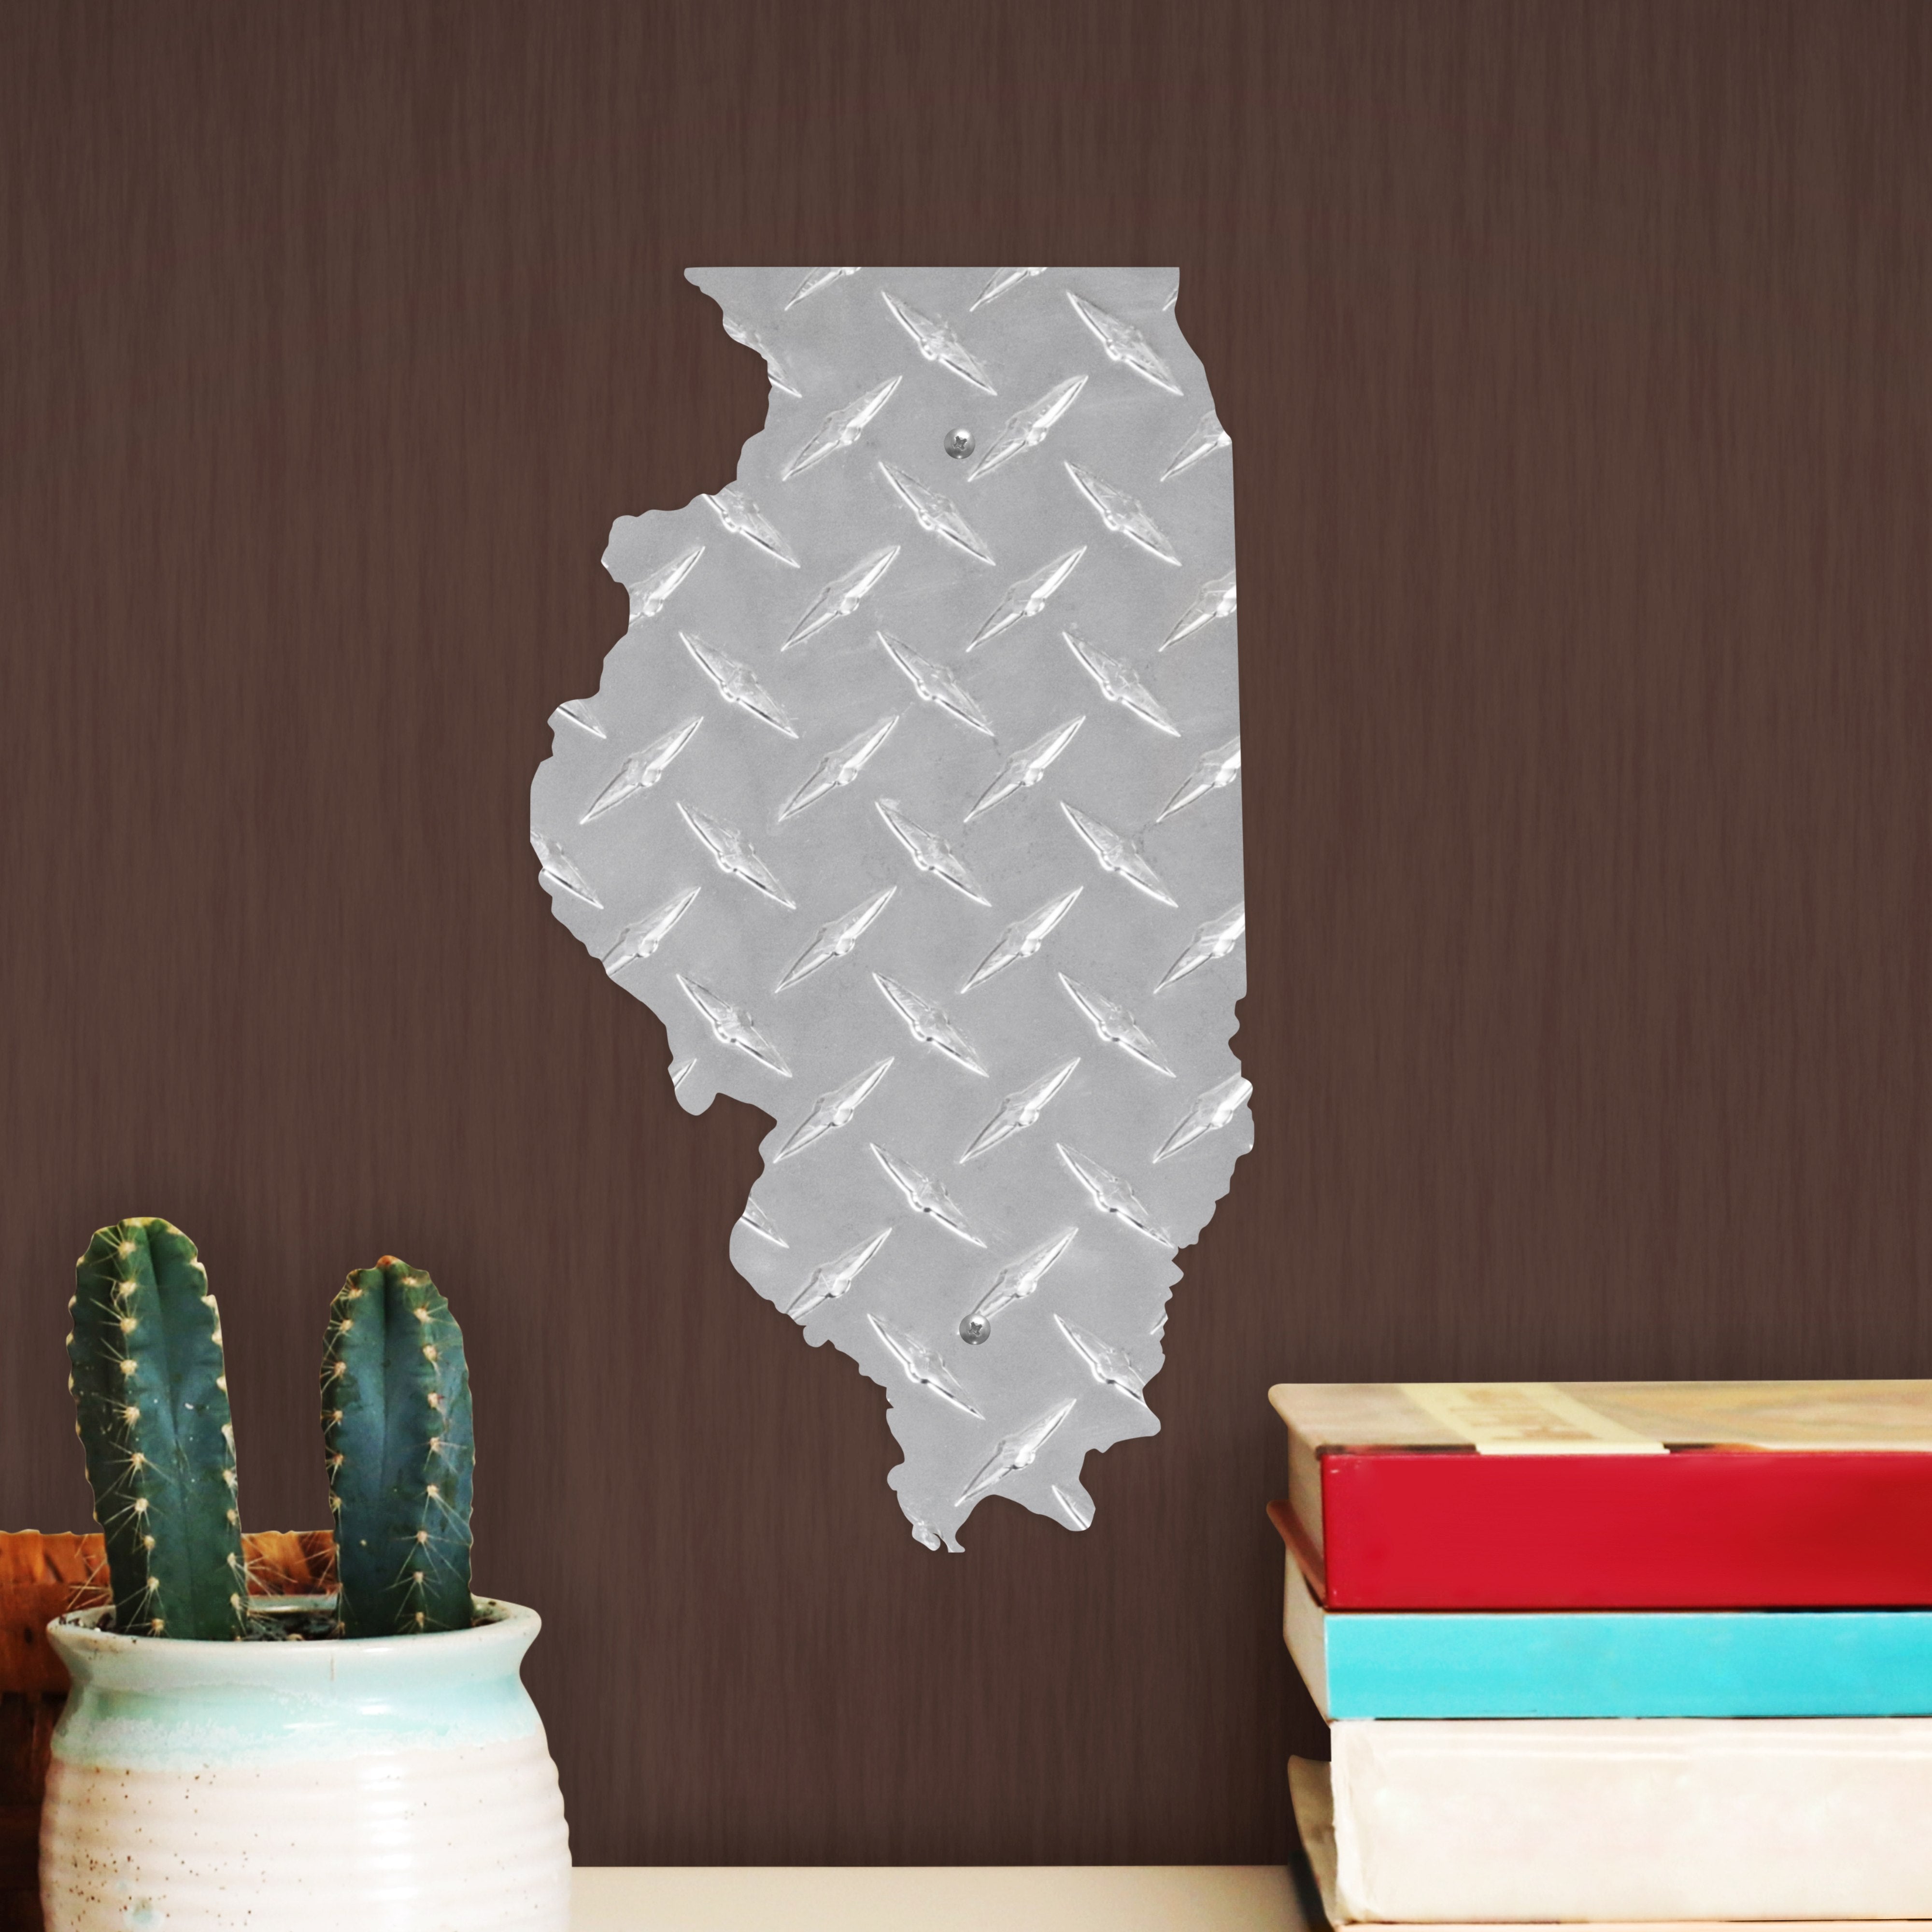 Illinois State Hanging Metal Wall Decor Durable Polished Aluminum Diamond Tread Pattern Indoor Outdoor with Mounting Hardware 12 Inch Tall